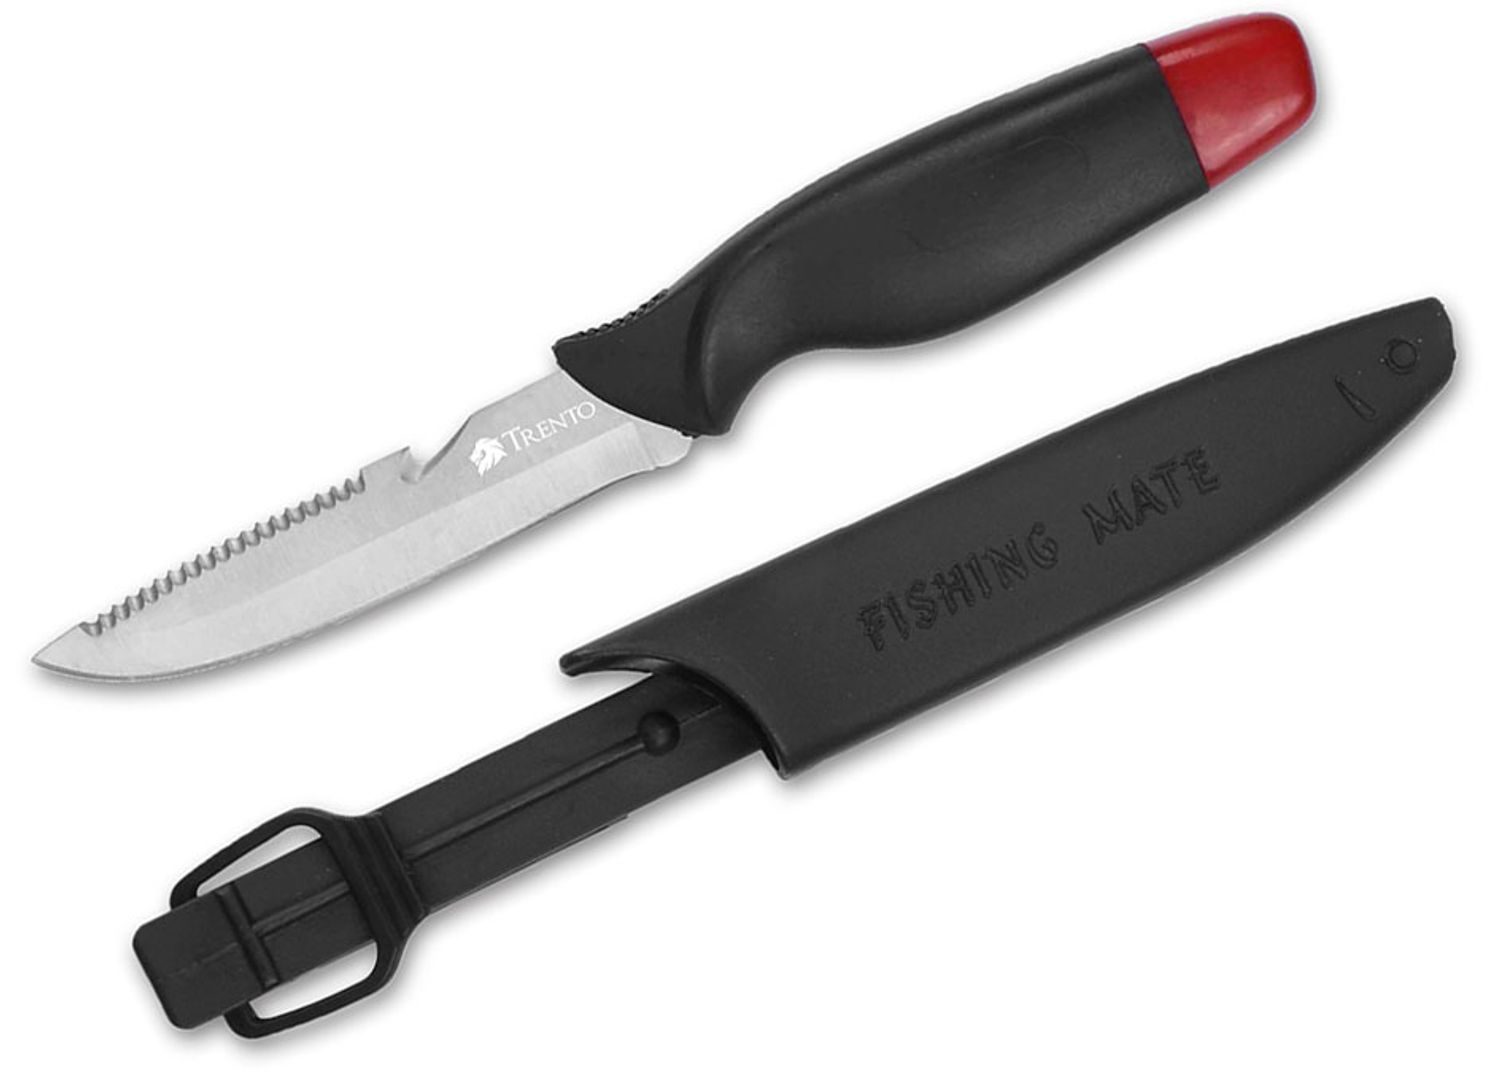 Trento Knives Fisherman 250 Fixed Blade Knife 3.98 420C Satin with Fish  Scaler, Red/Black Polymer Handles, Molded Plastic Sheath - KnifeCenter -  131597 - Discontinued